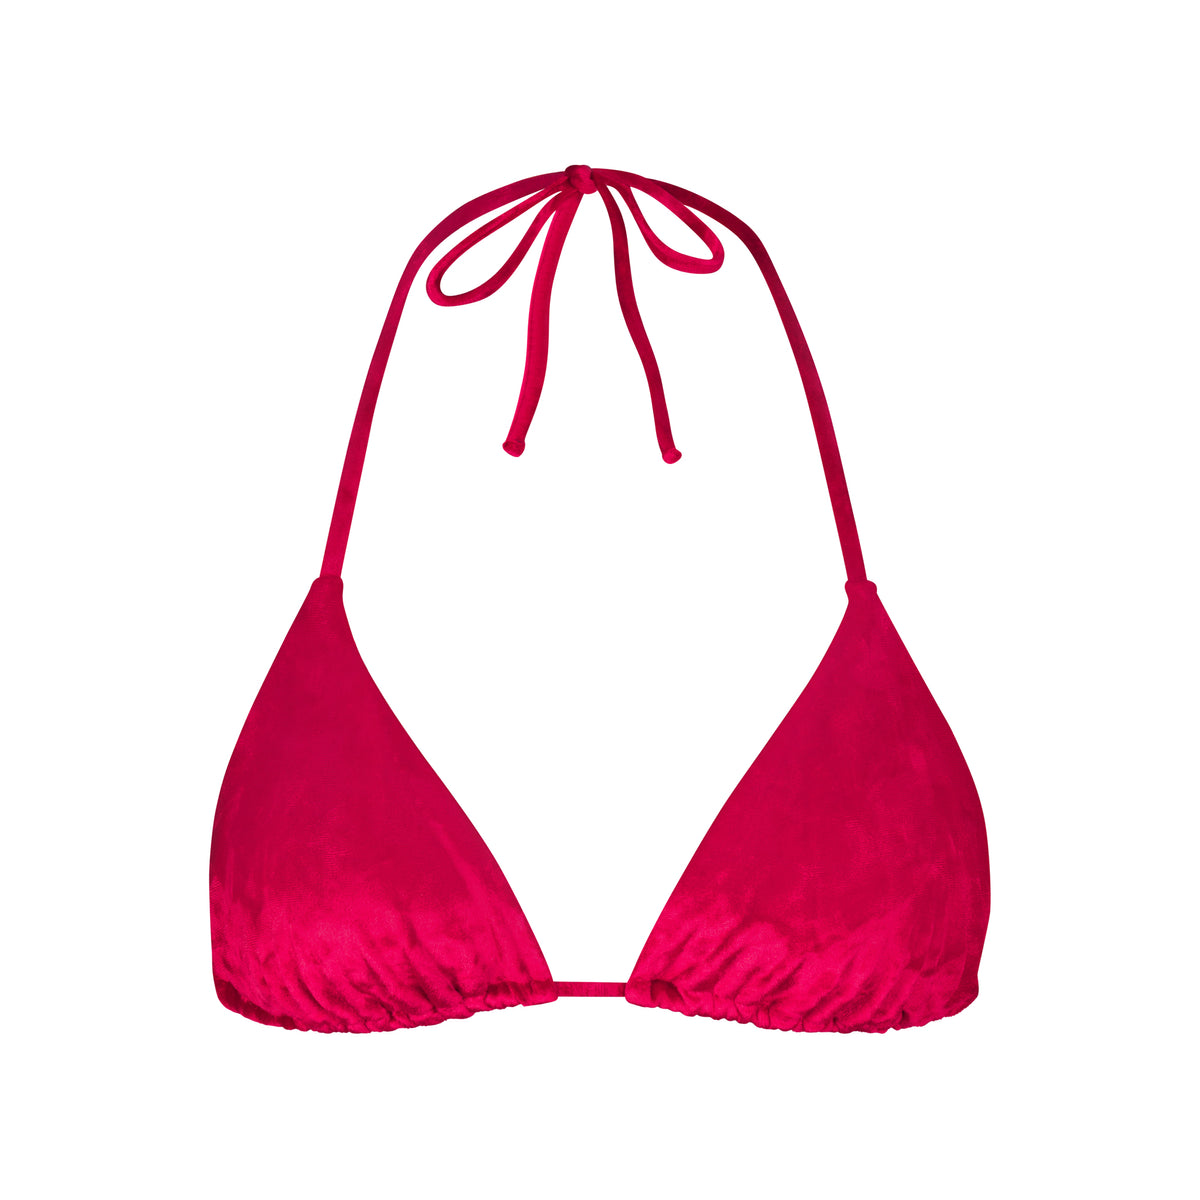 CRUSHED VELVET TRIANGLE BIKINI TOP – Solutions For Every Body | Skimsus ...